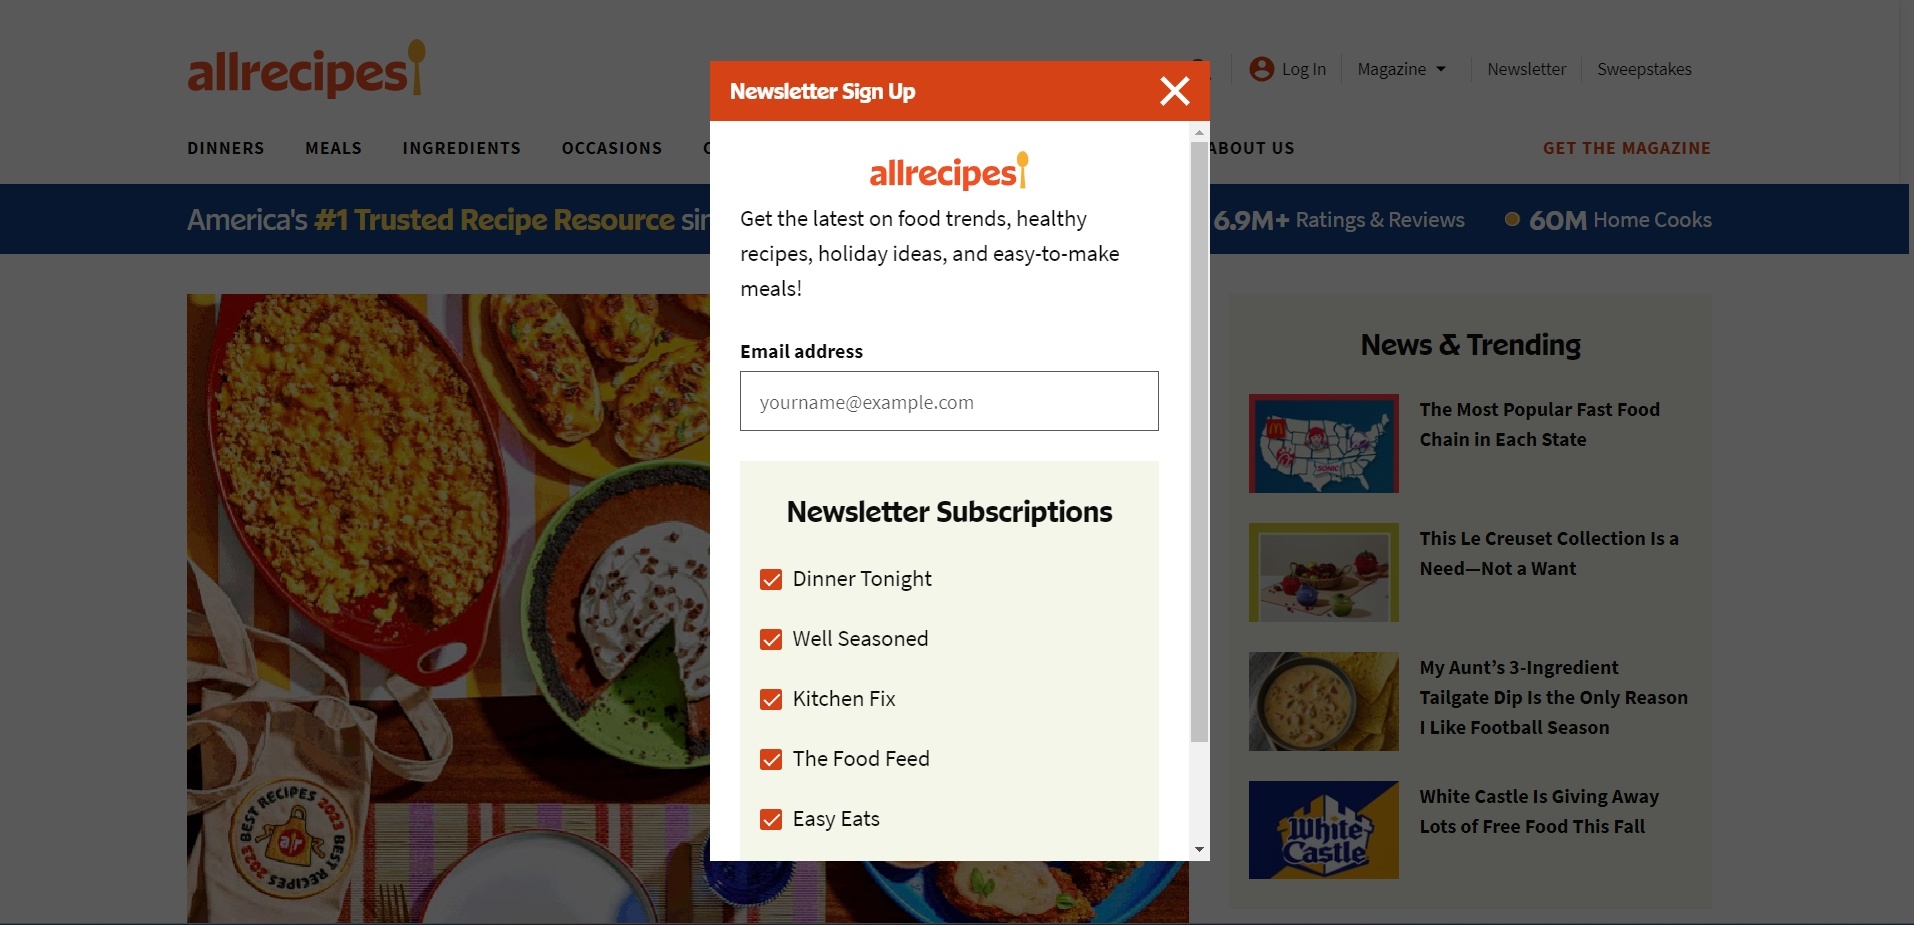 All Recipe newsletter subscriptions sign up offer